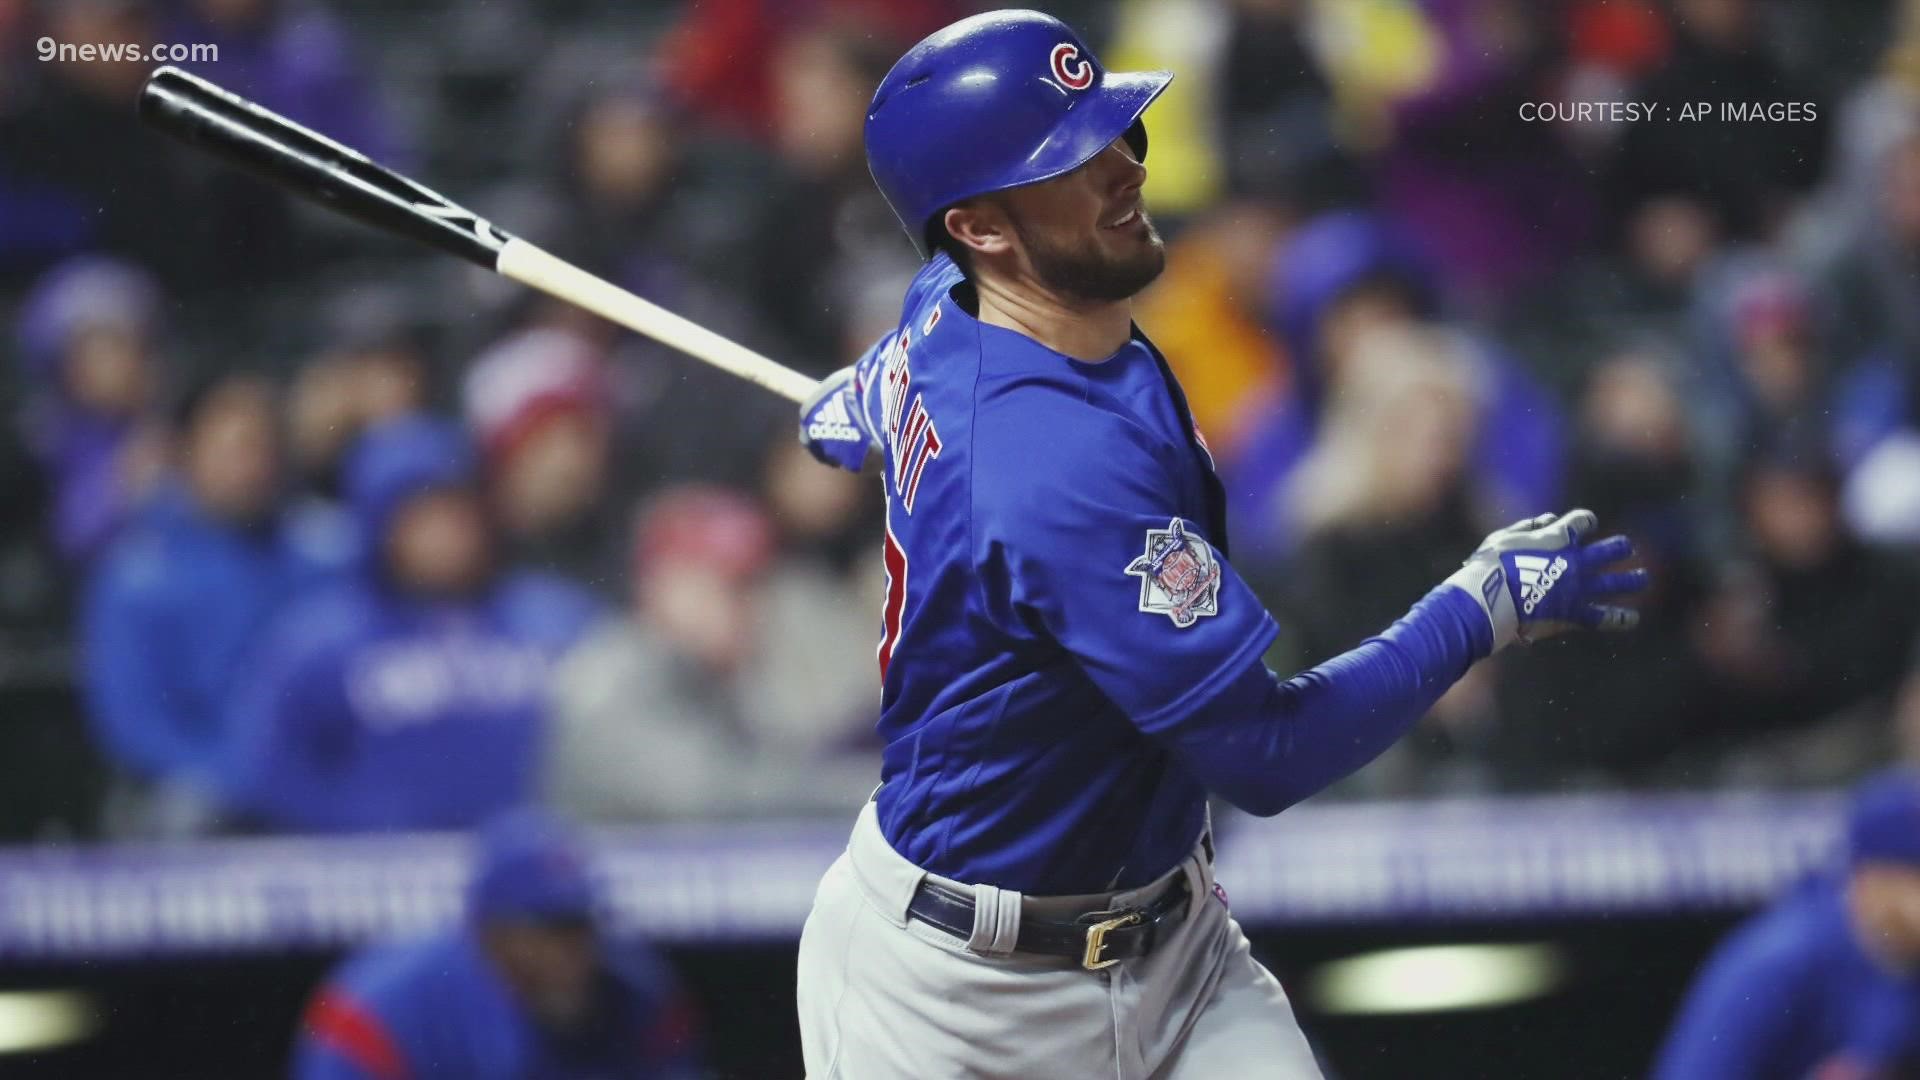 Four-time All Star and former NL MVP Kris Bryant is coming to Coors Field.